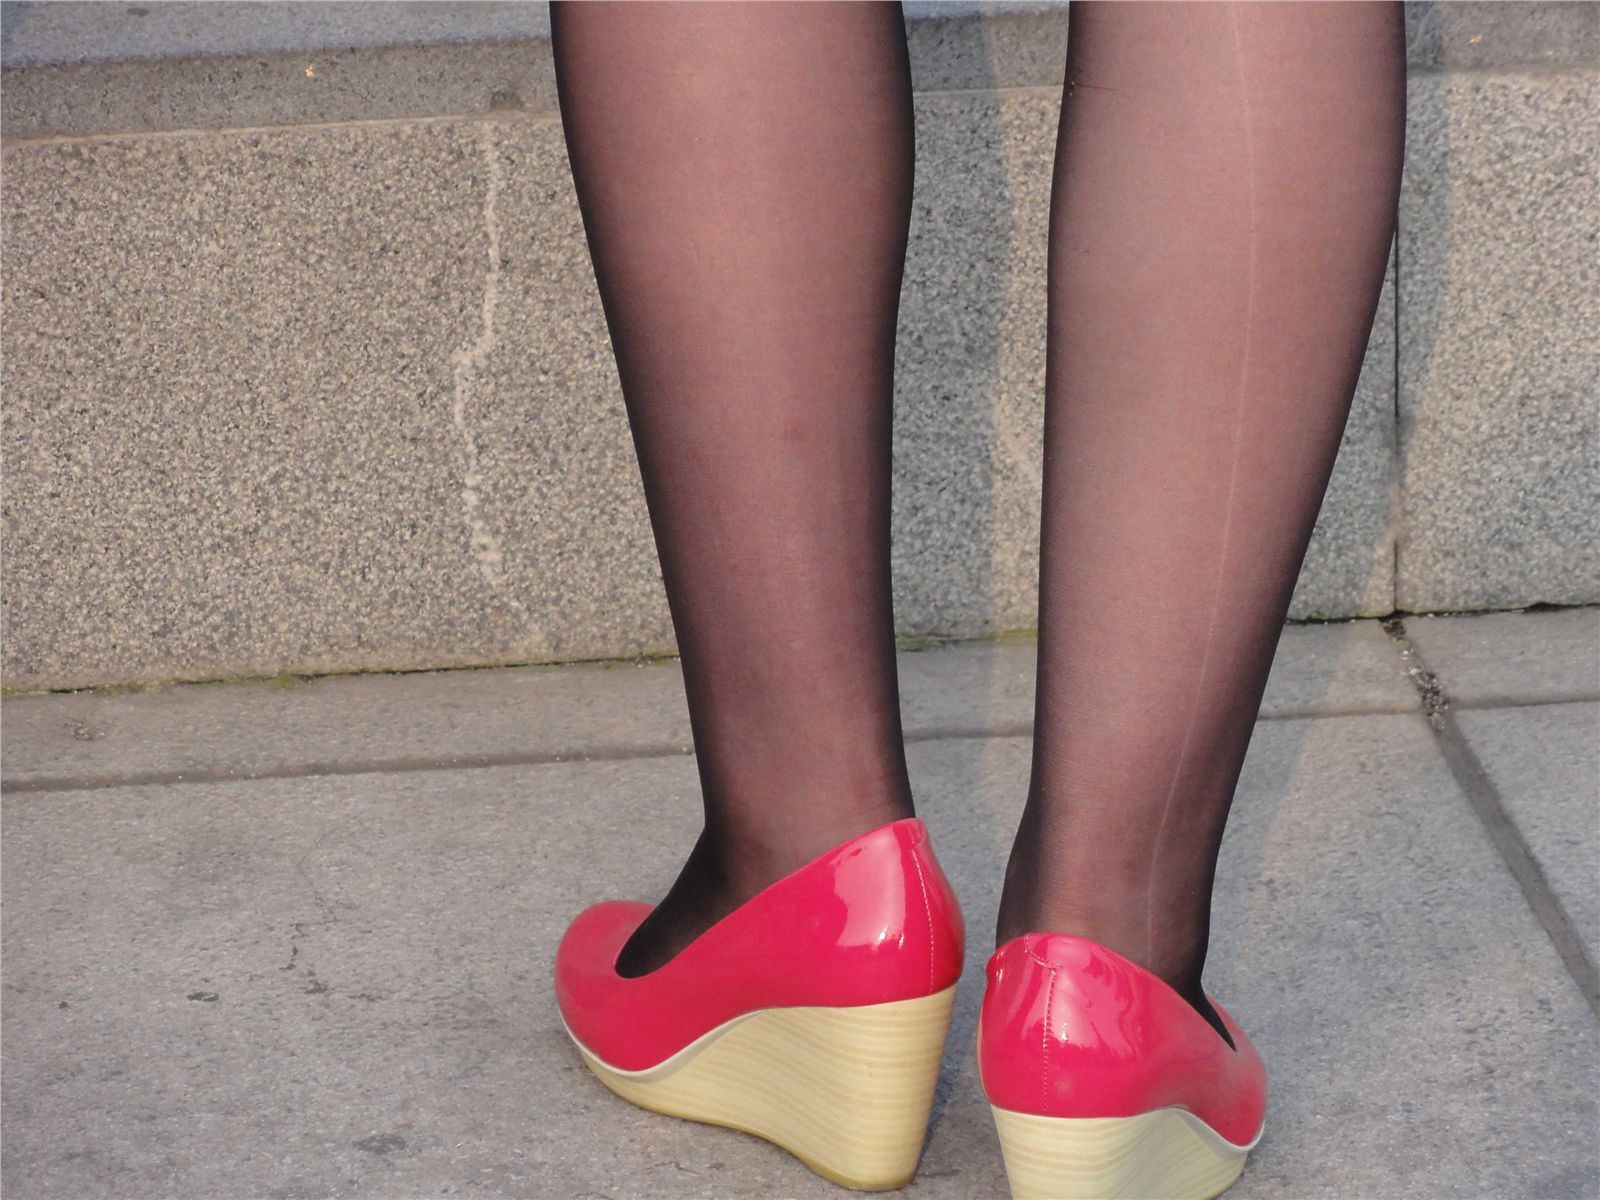 [outdoor Street Photo] 2013.09.06 Bund beauty black silk red shoes, thin stockings